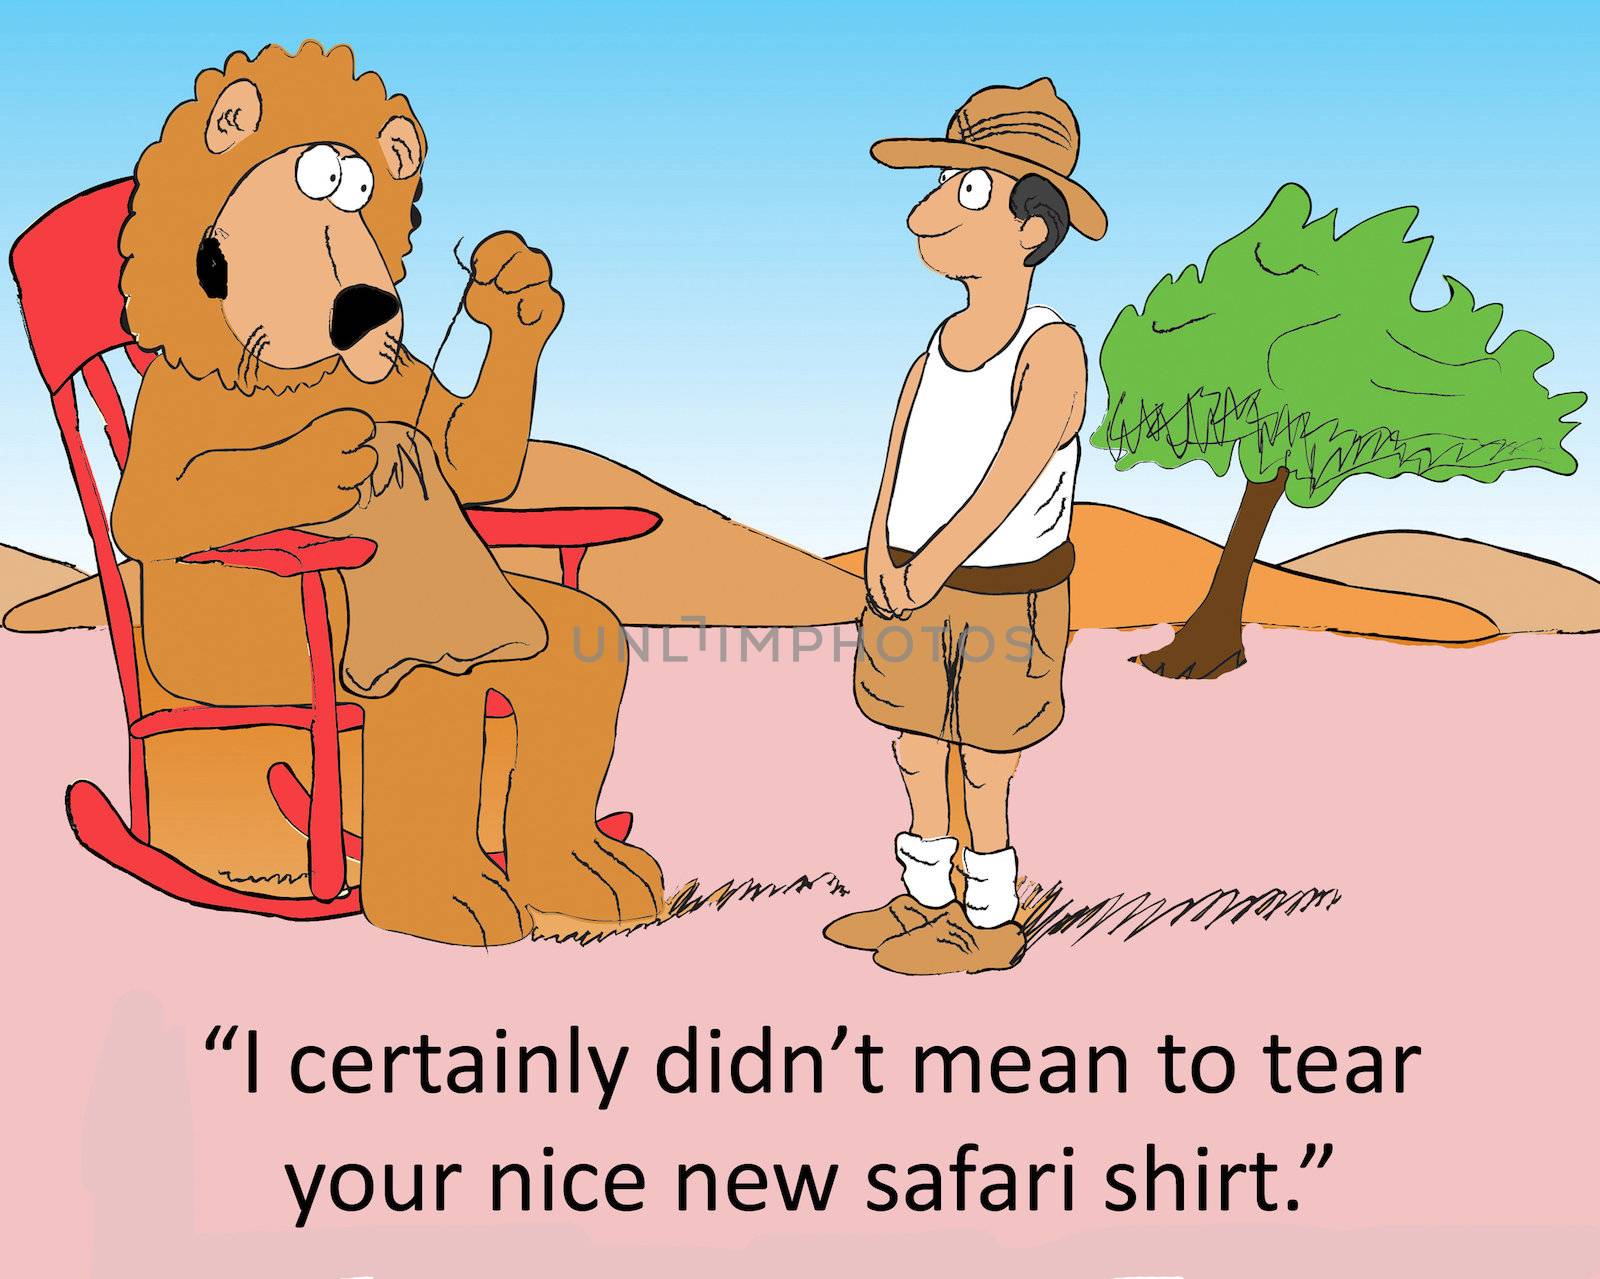 "I certainly didn't mean to tear your nice new safari shirt."